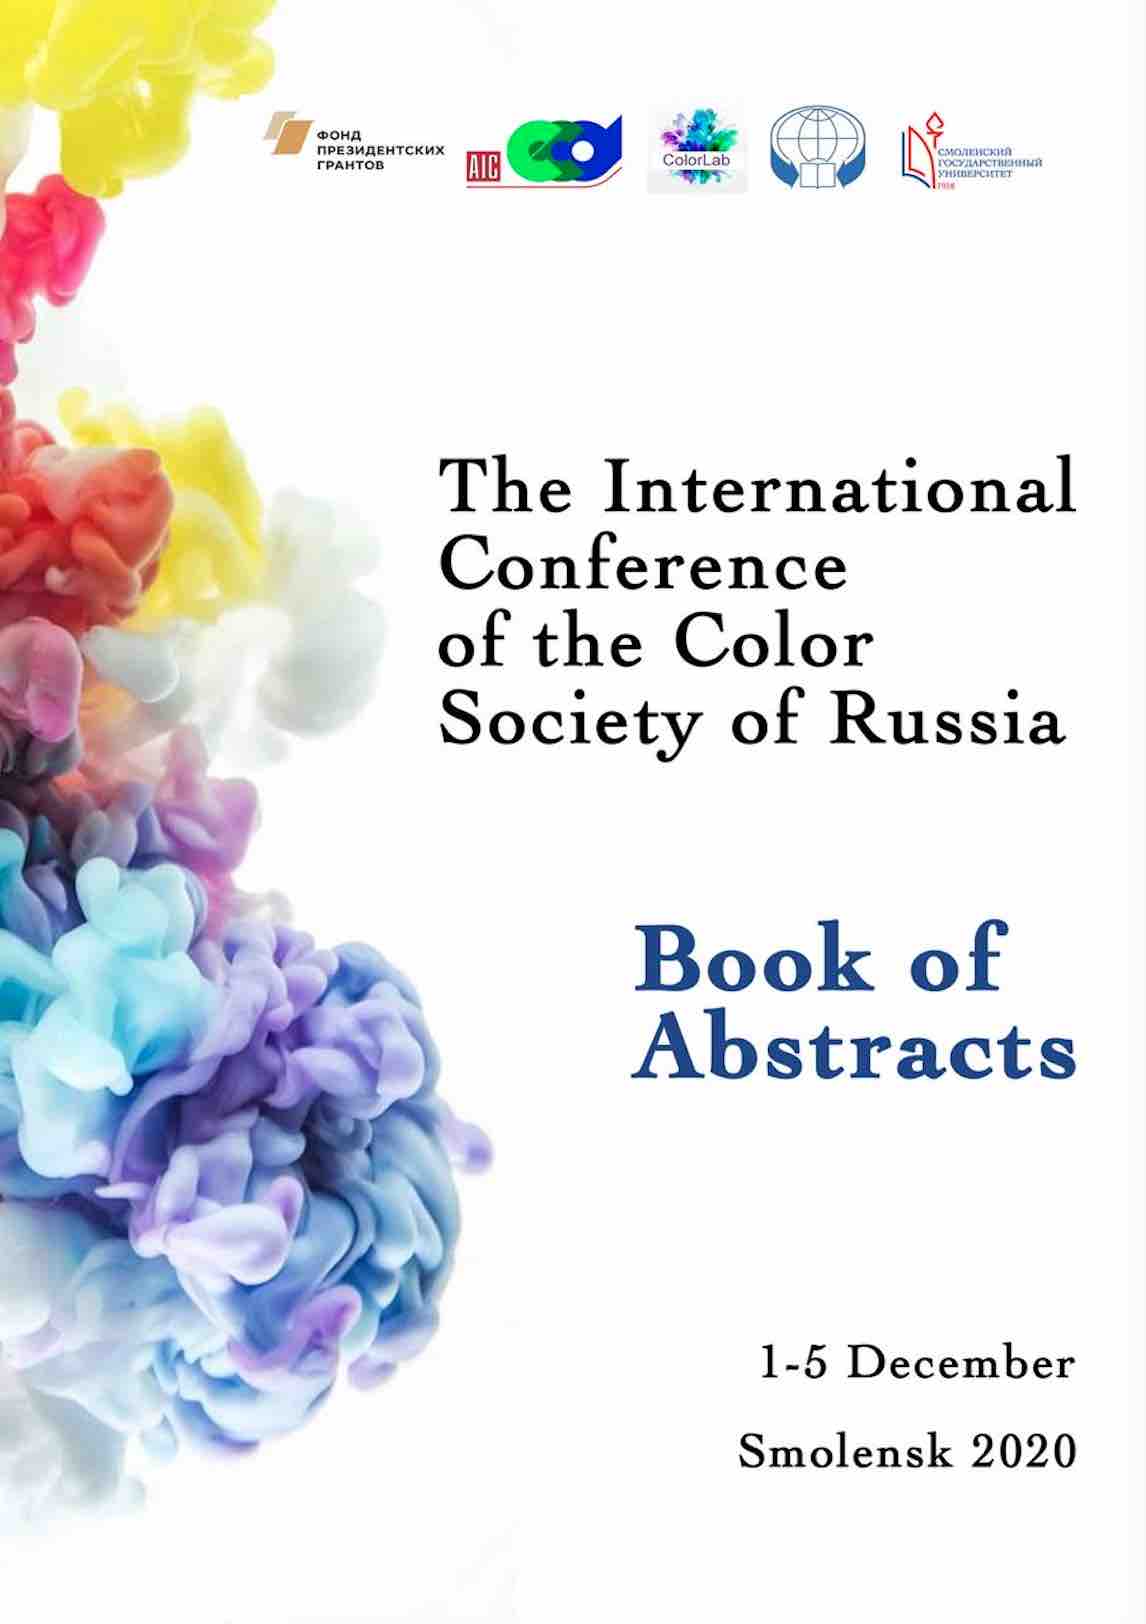 RUcolor2020 Book of Abstracts